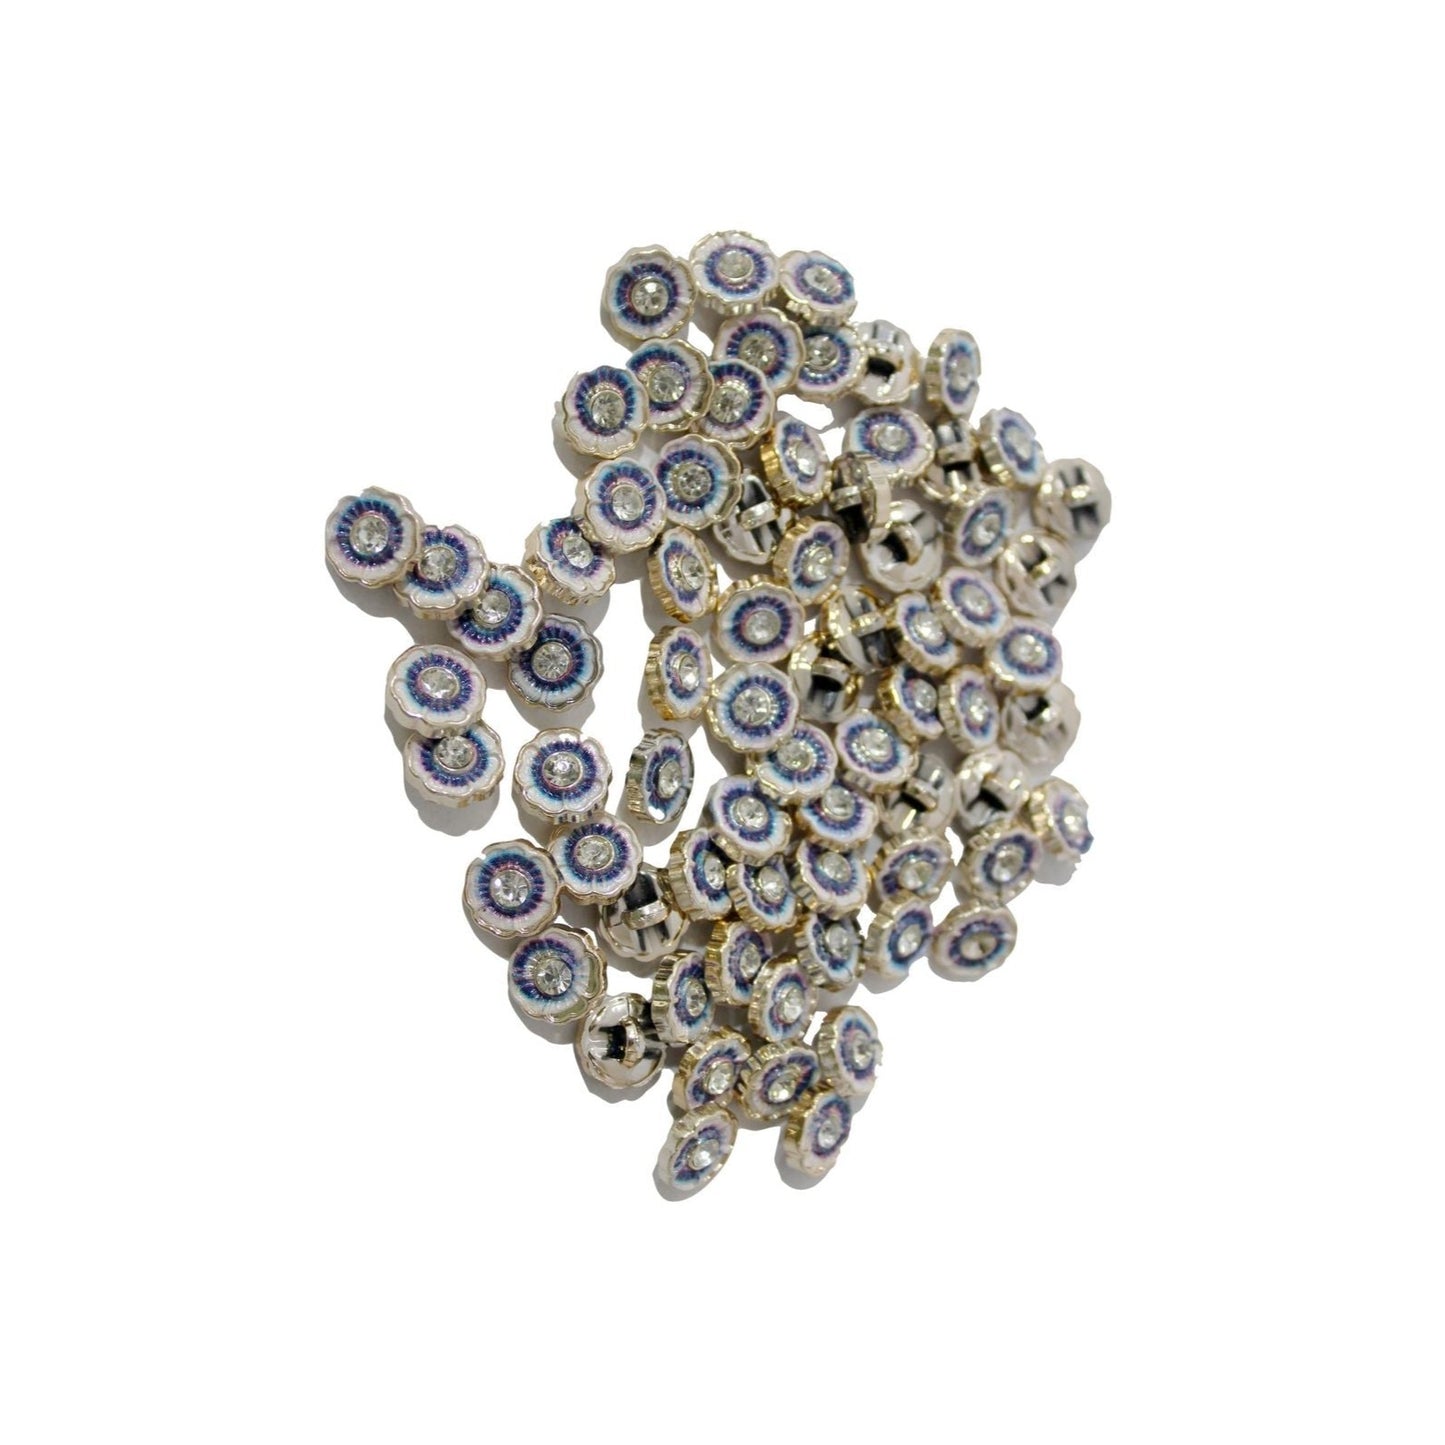 Indian Petals Metal Beautiful Floral Button Cabochons Motif for Craft or Decoration - 12433, Navy